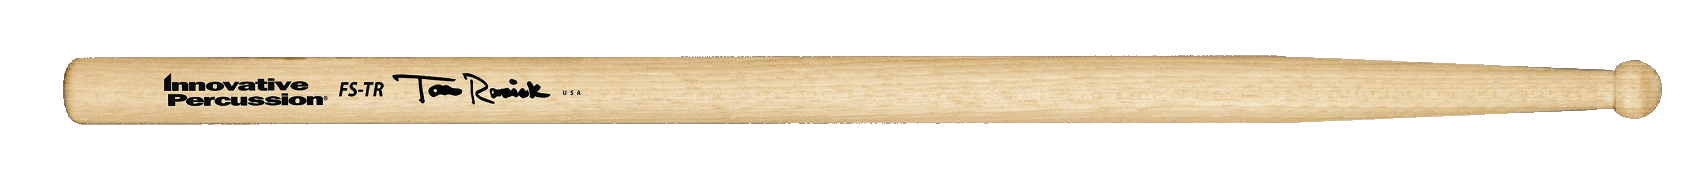 Tom Rarick Model / Hickory Field Series Hickory Marching Snare Drum Sticks